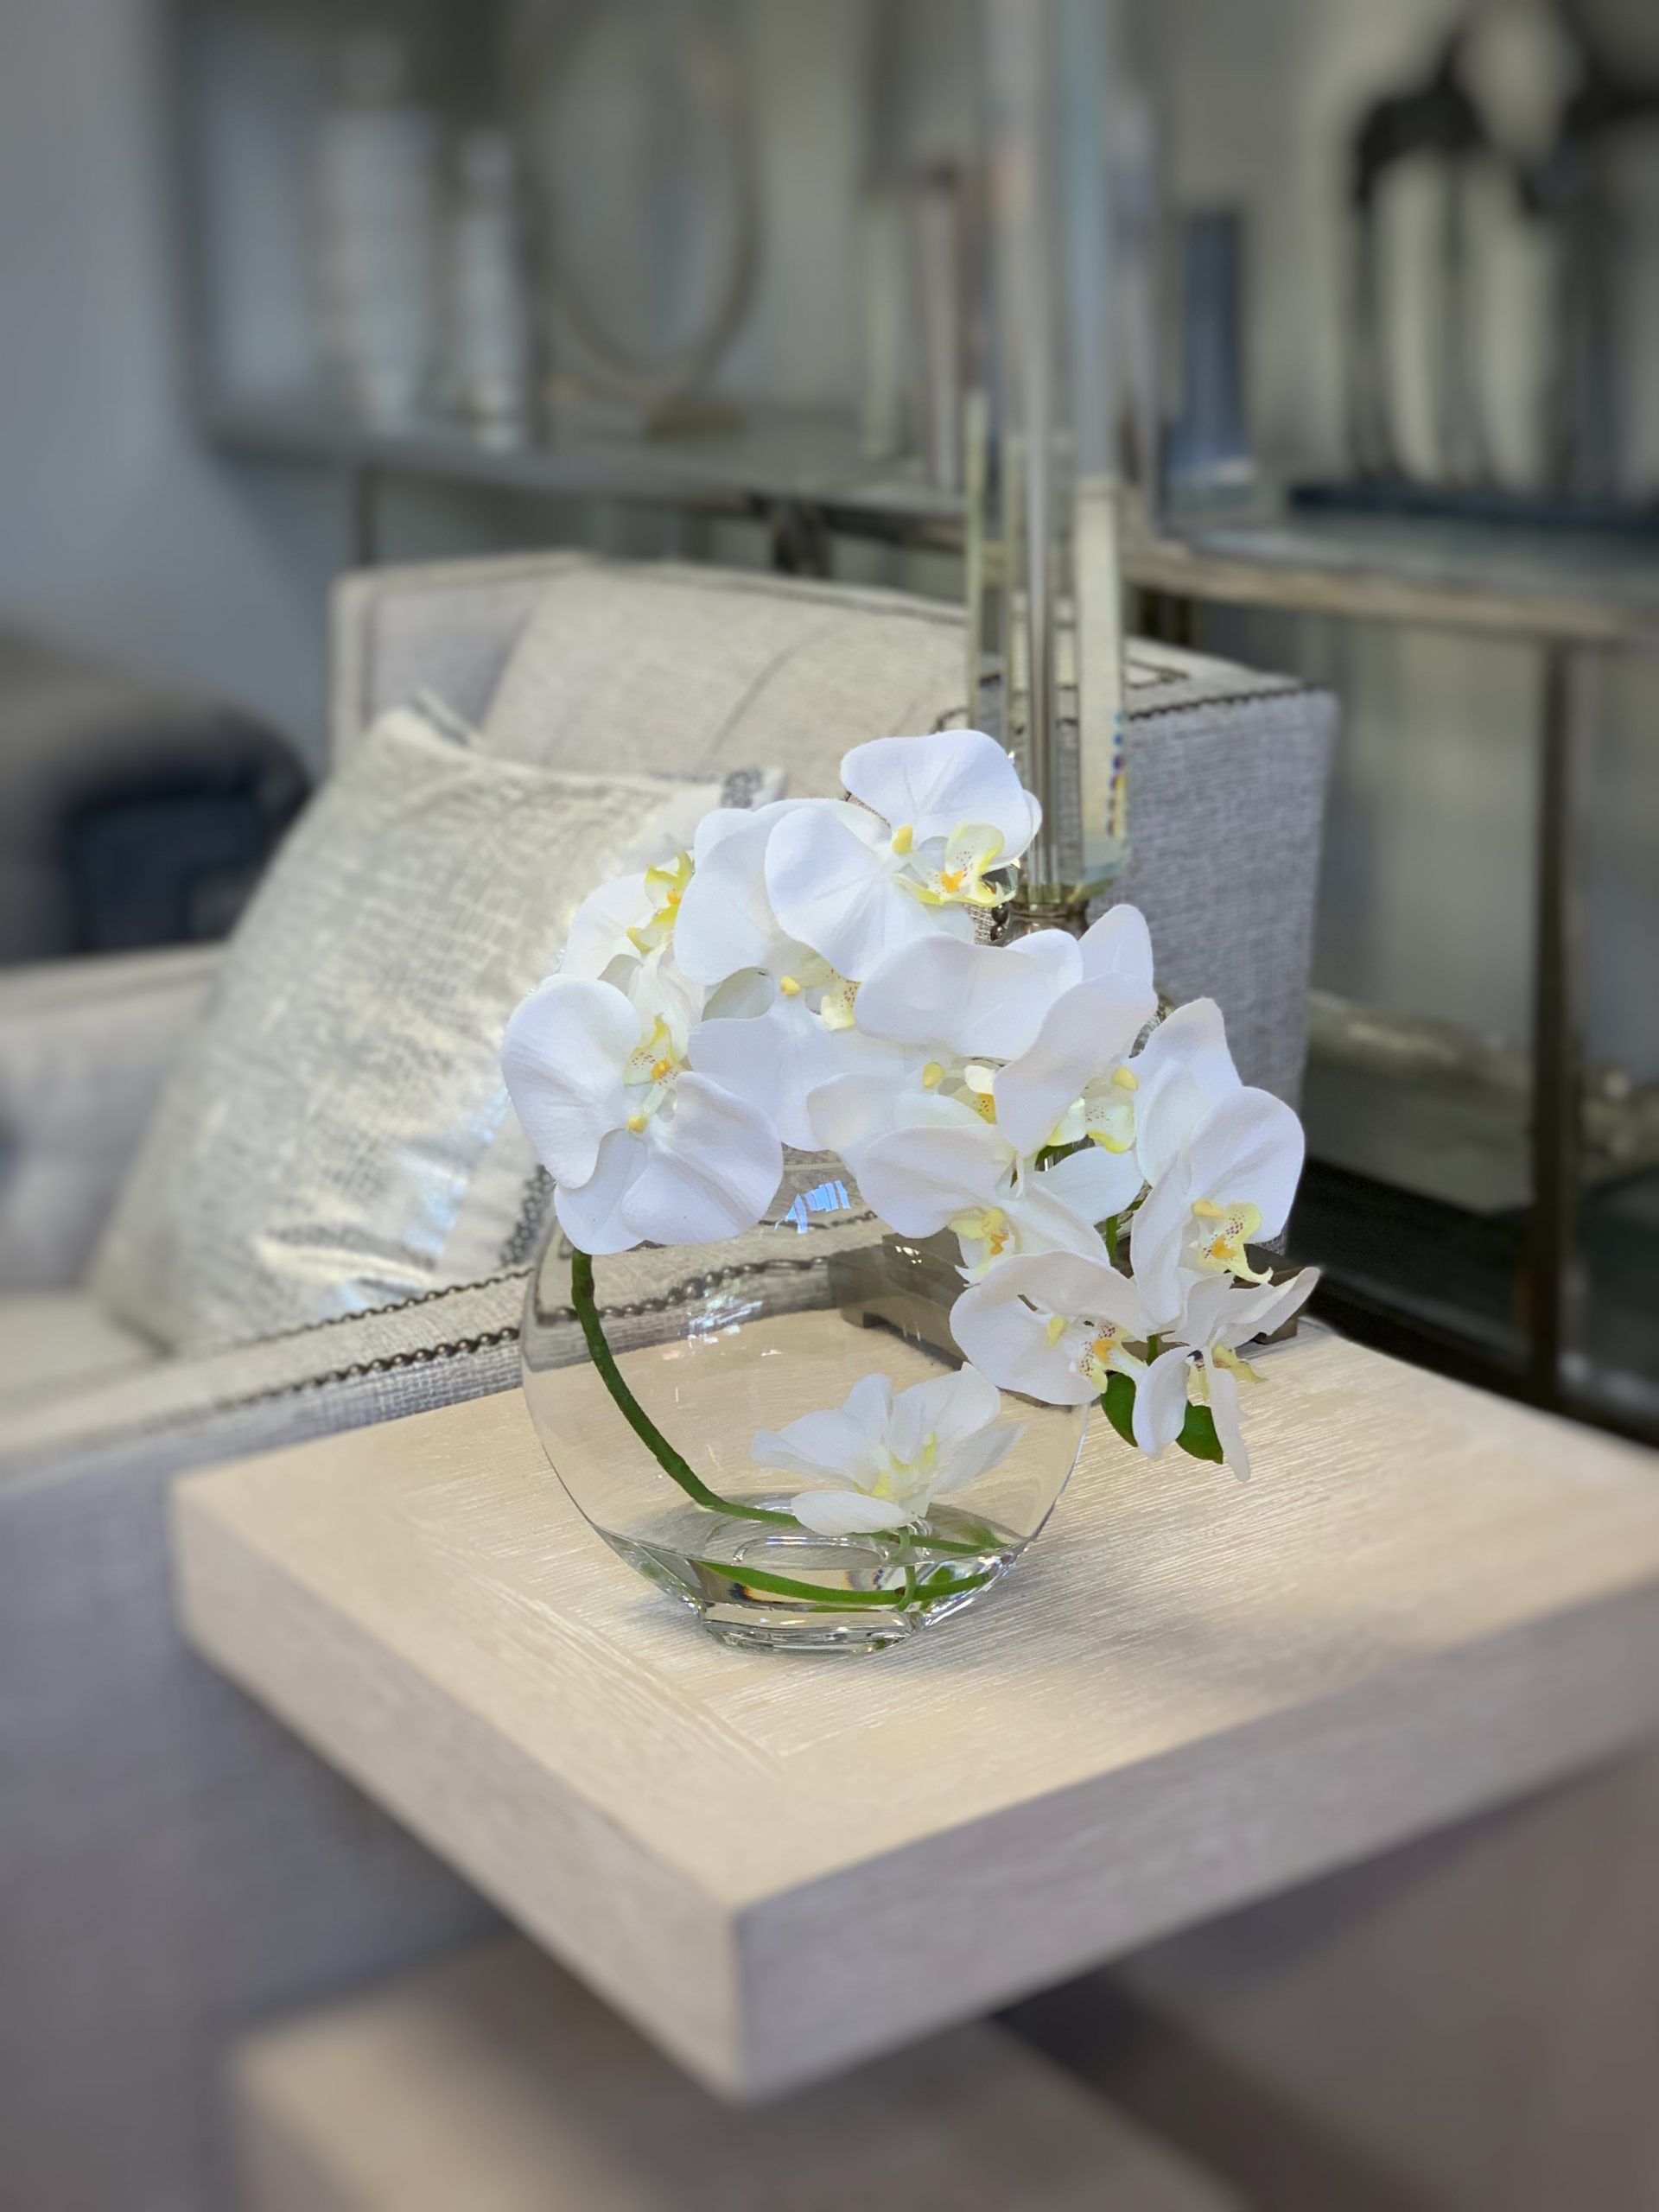 Creative Displays Orchid in Flat Glass Vase